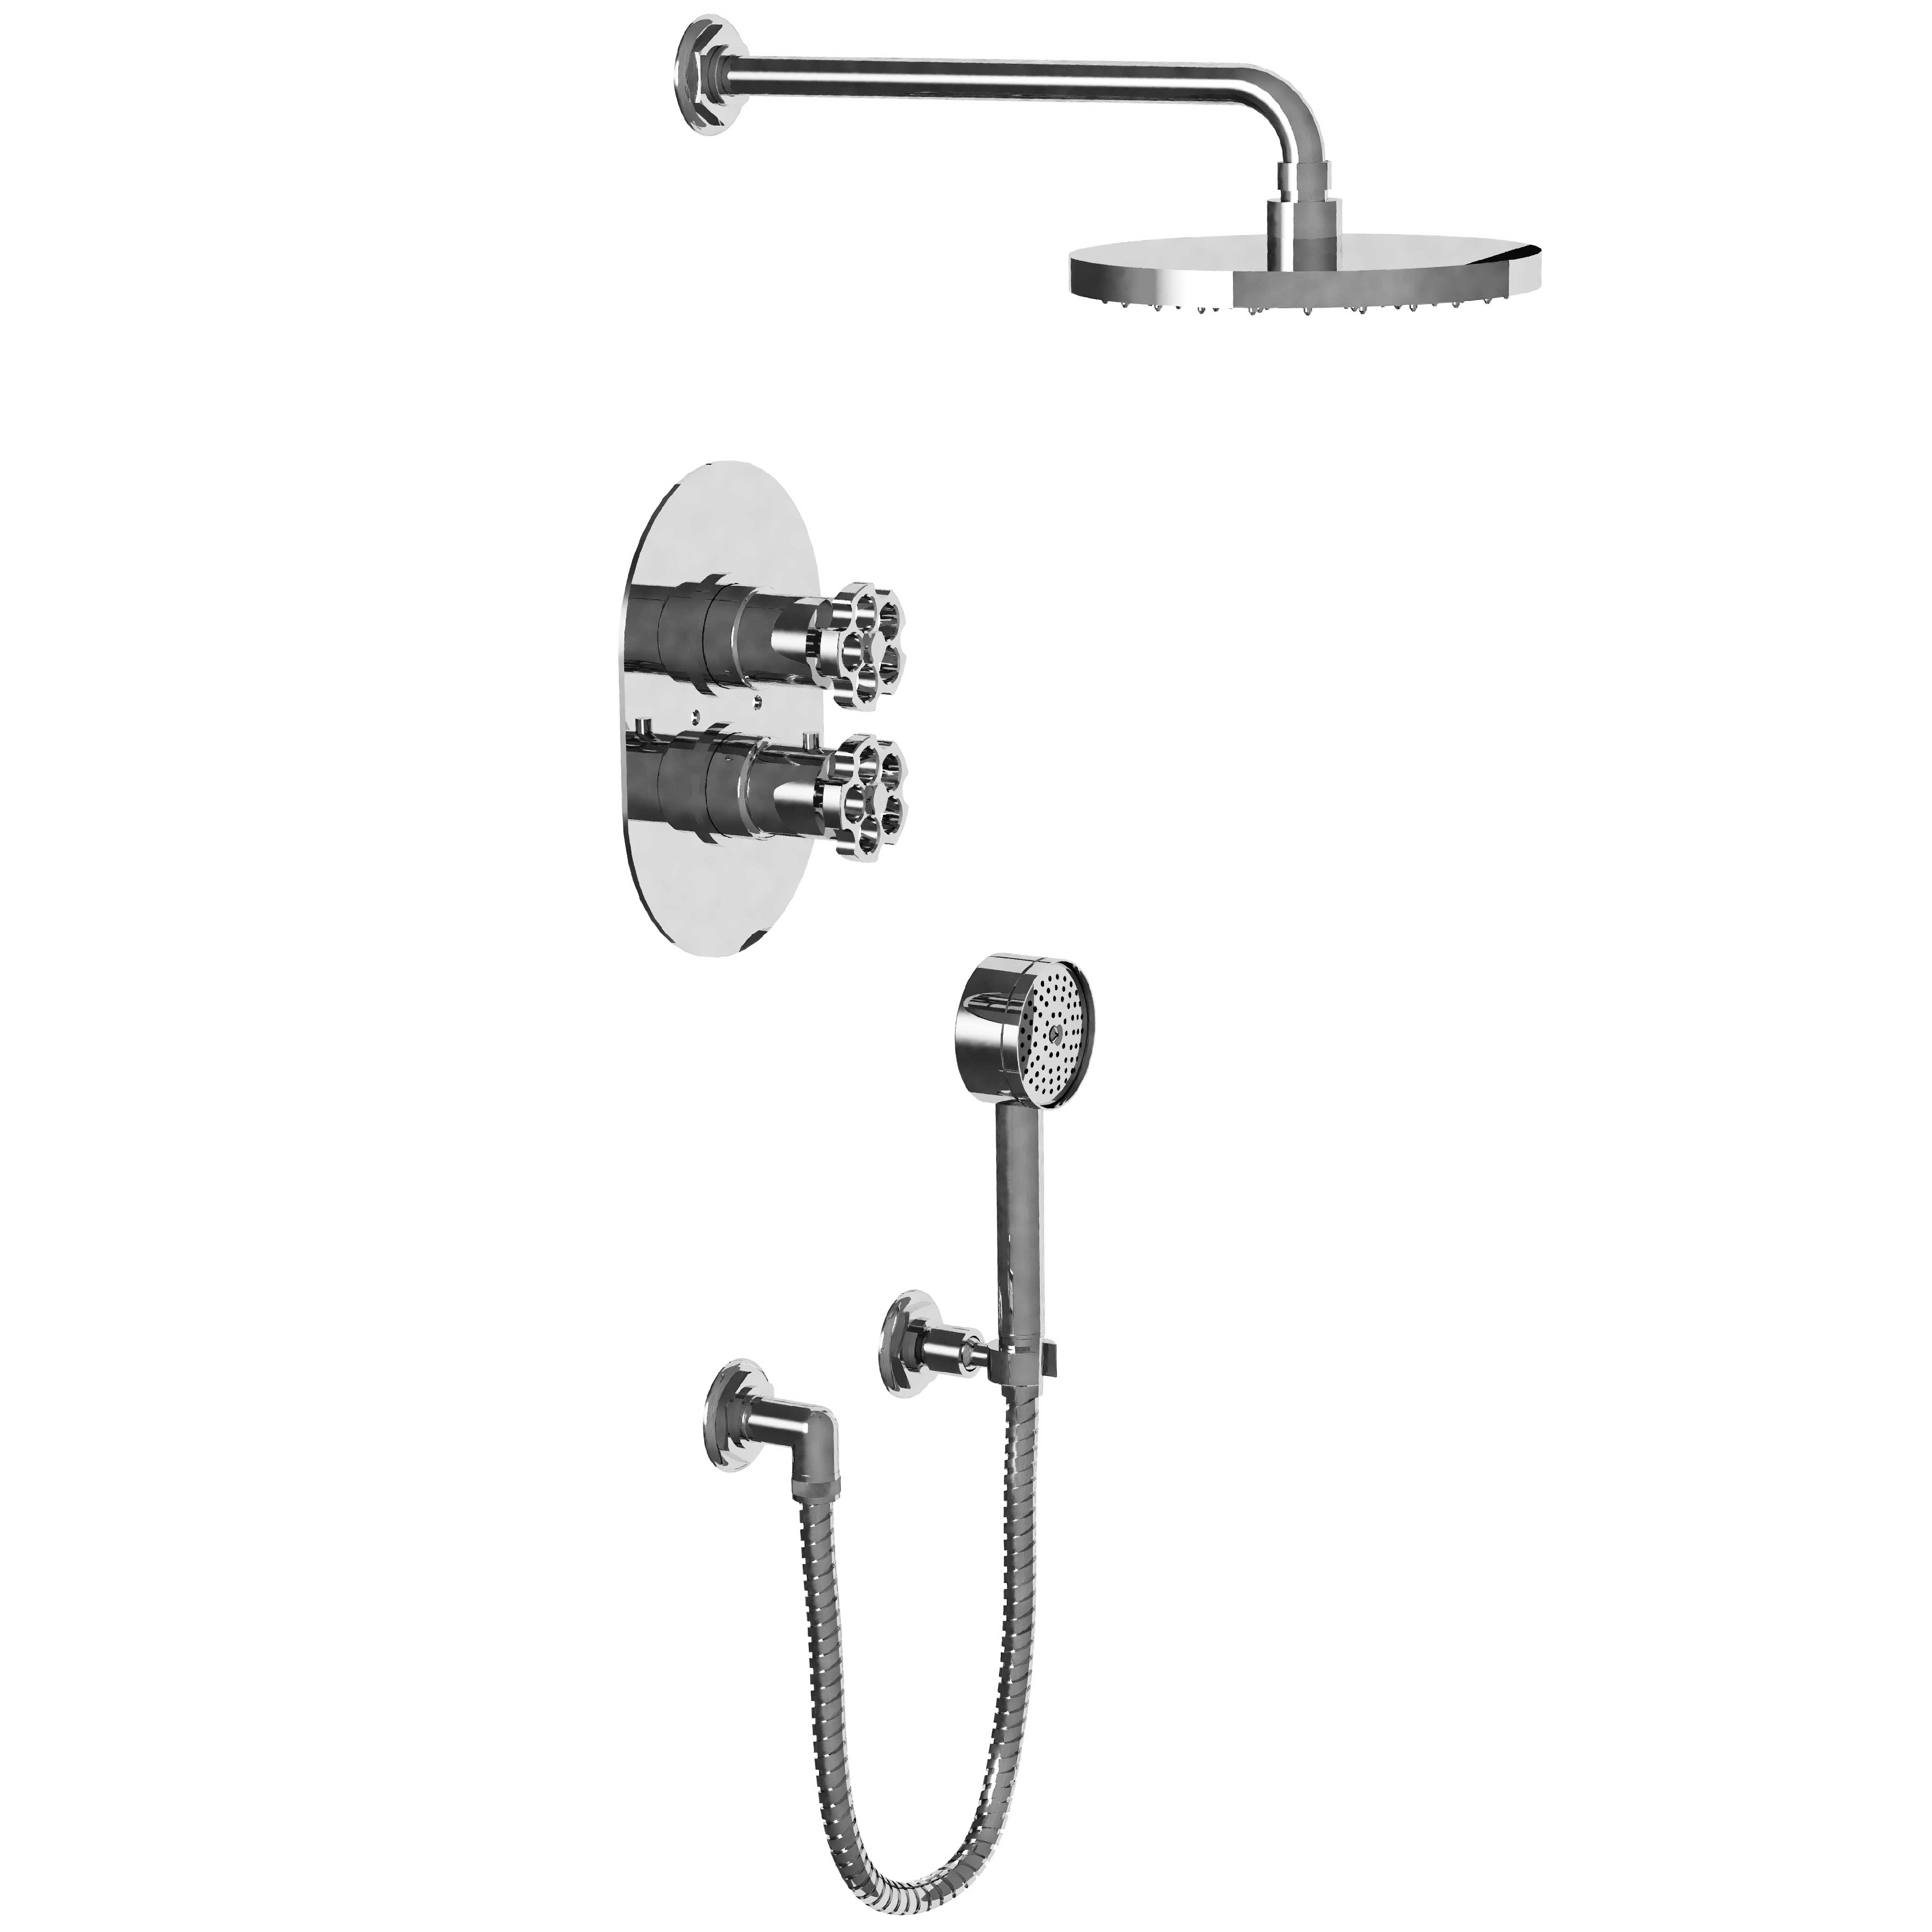 M81-2308T2 Thermostatic shower mixer package